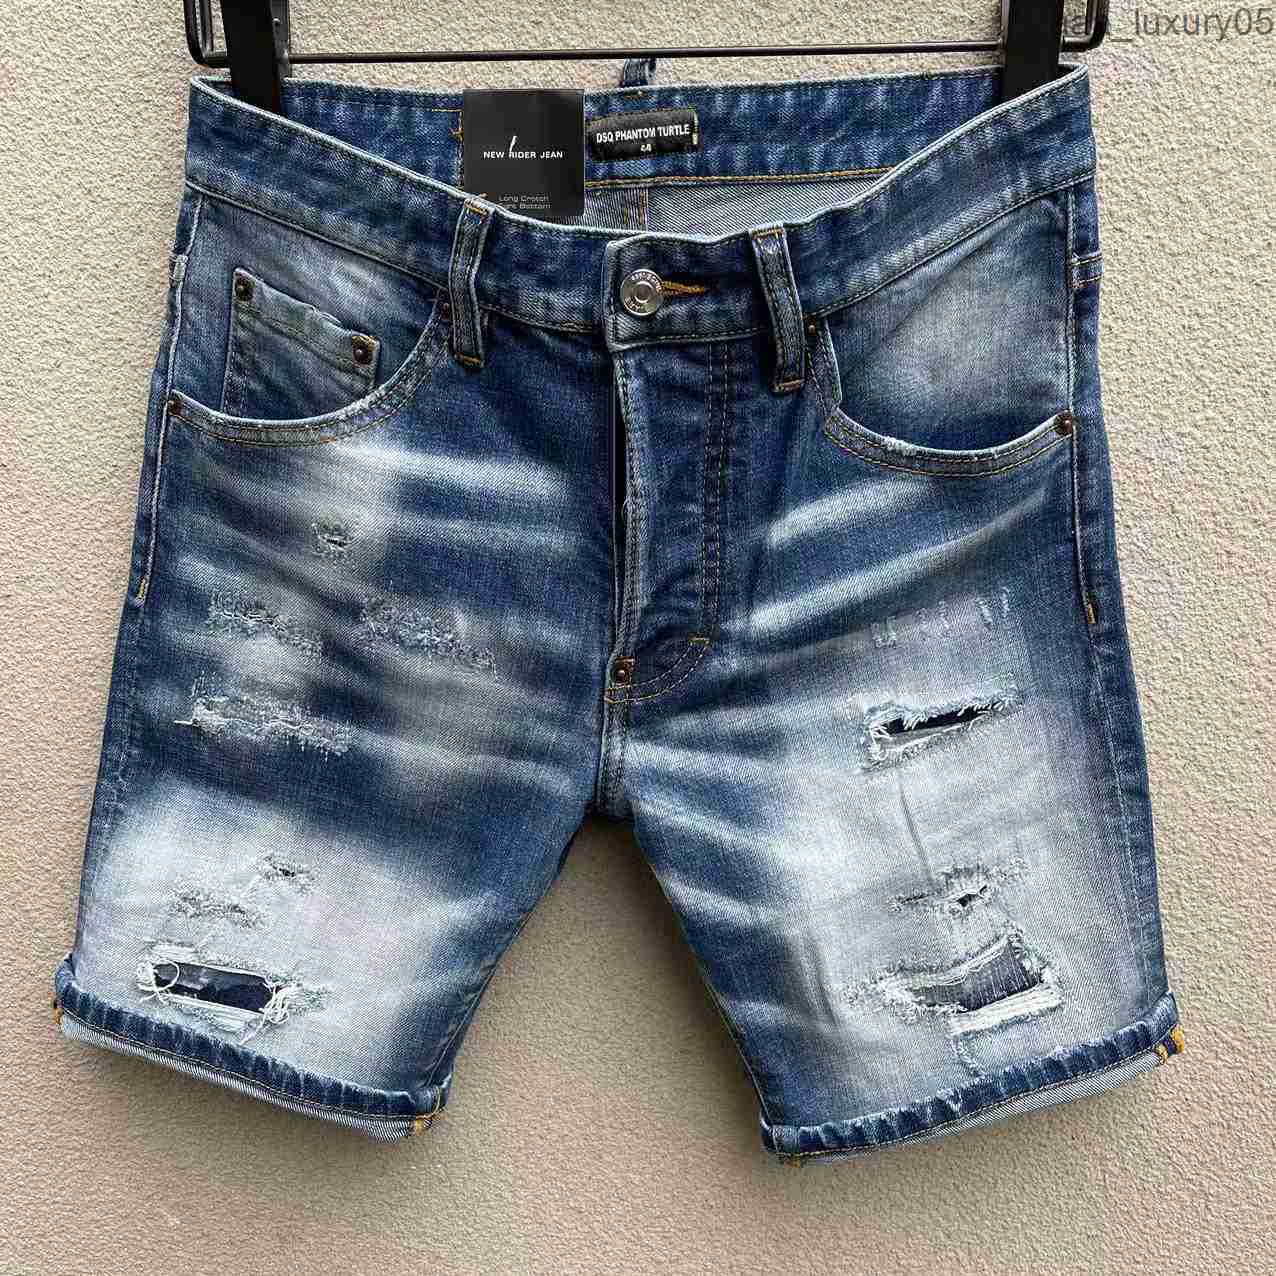 

Jeans Men dsquared2 Jean Mens Luxury Designer Skinny Ripped Cool Guy Causal Hole Denim Fashion Brand Fit Jeans Man Washed Pants 20200 dsquare 2 d2 dsqs dsq2s, As picture show